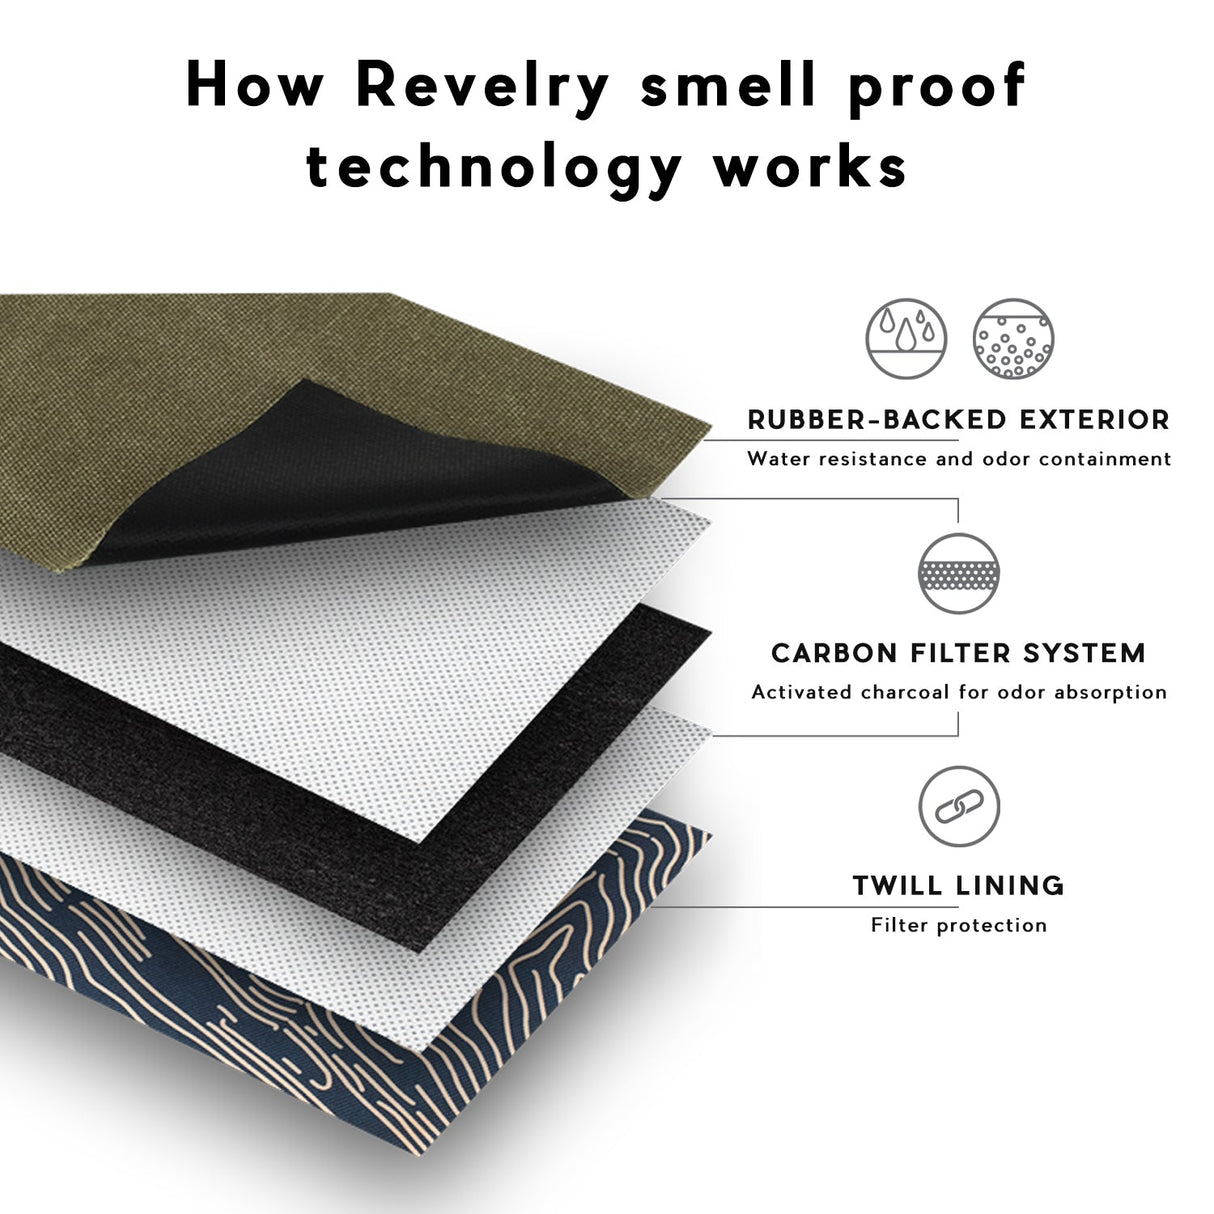 Revelry Supply The Rolling Kit layers showing smell proof technology with carbon filter system